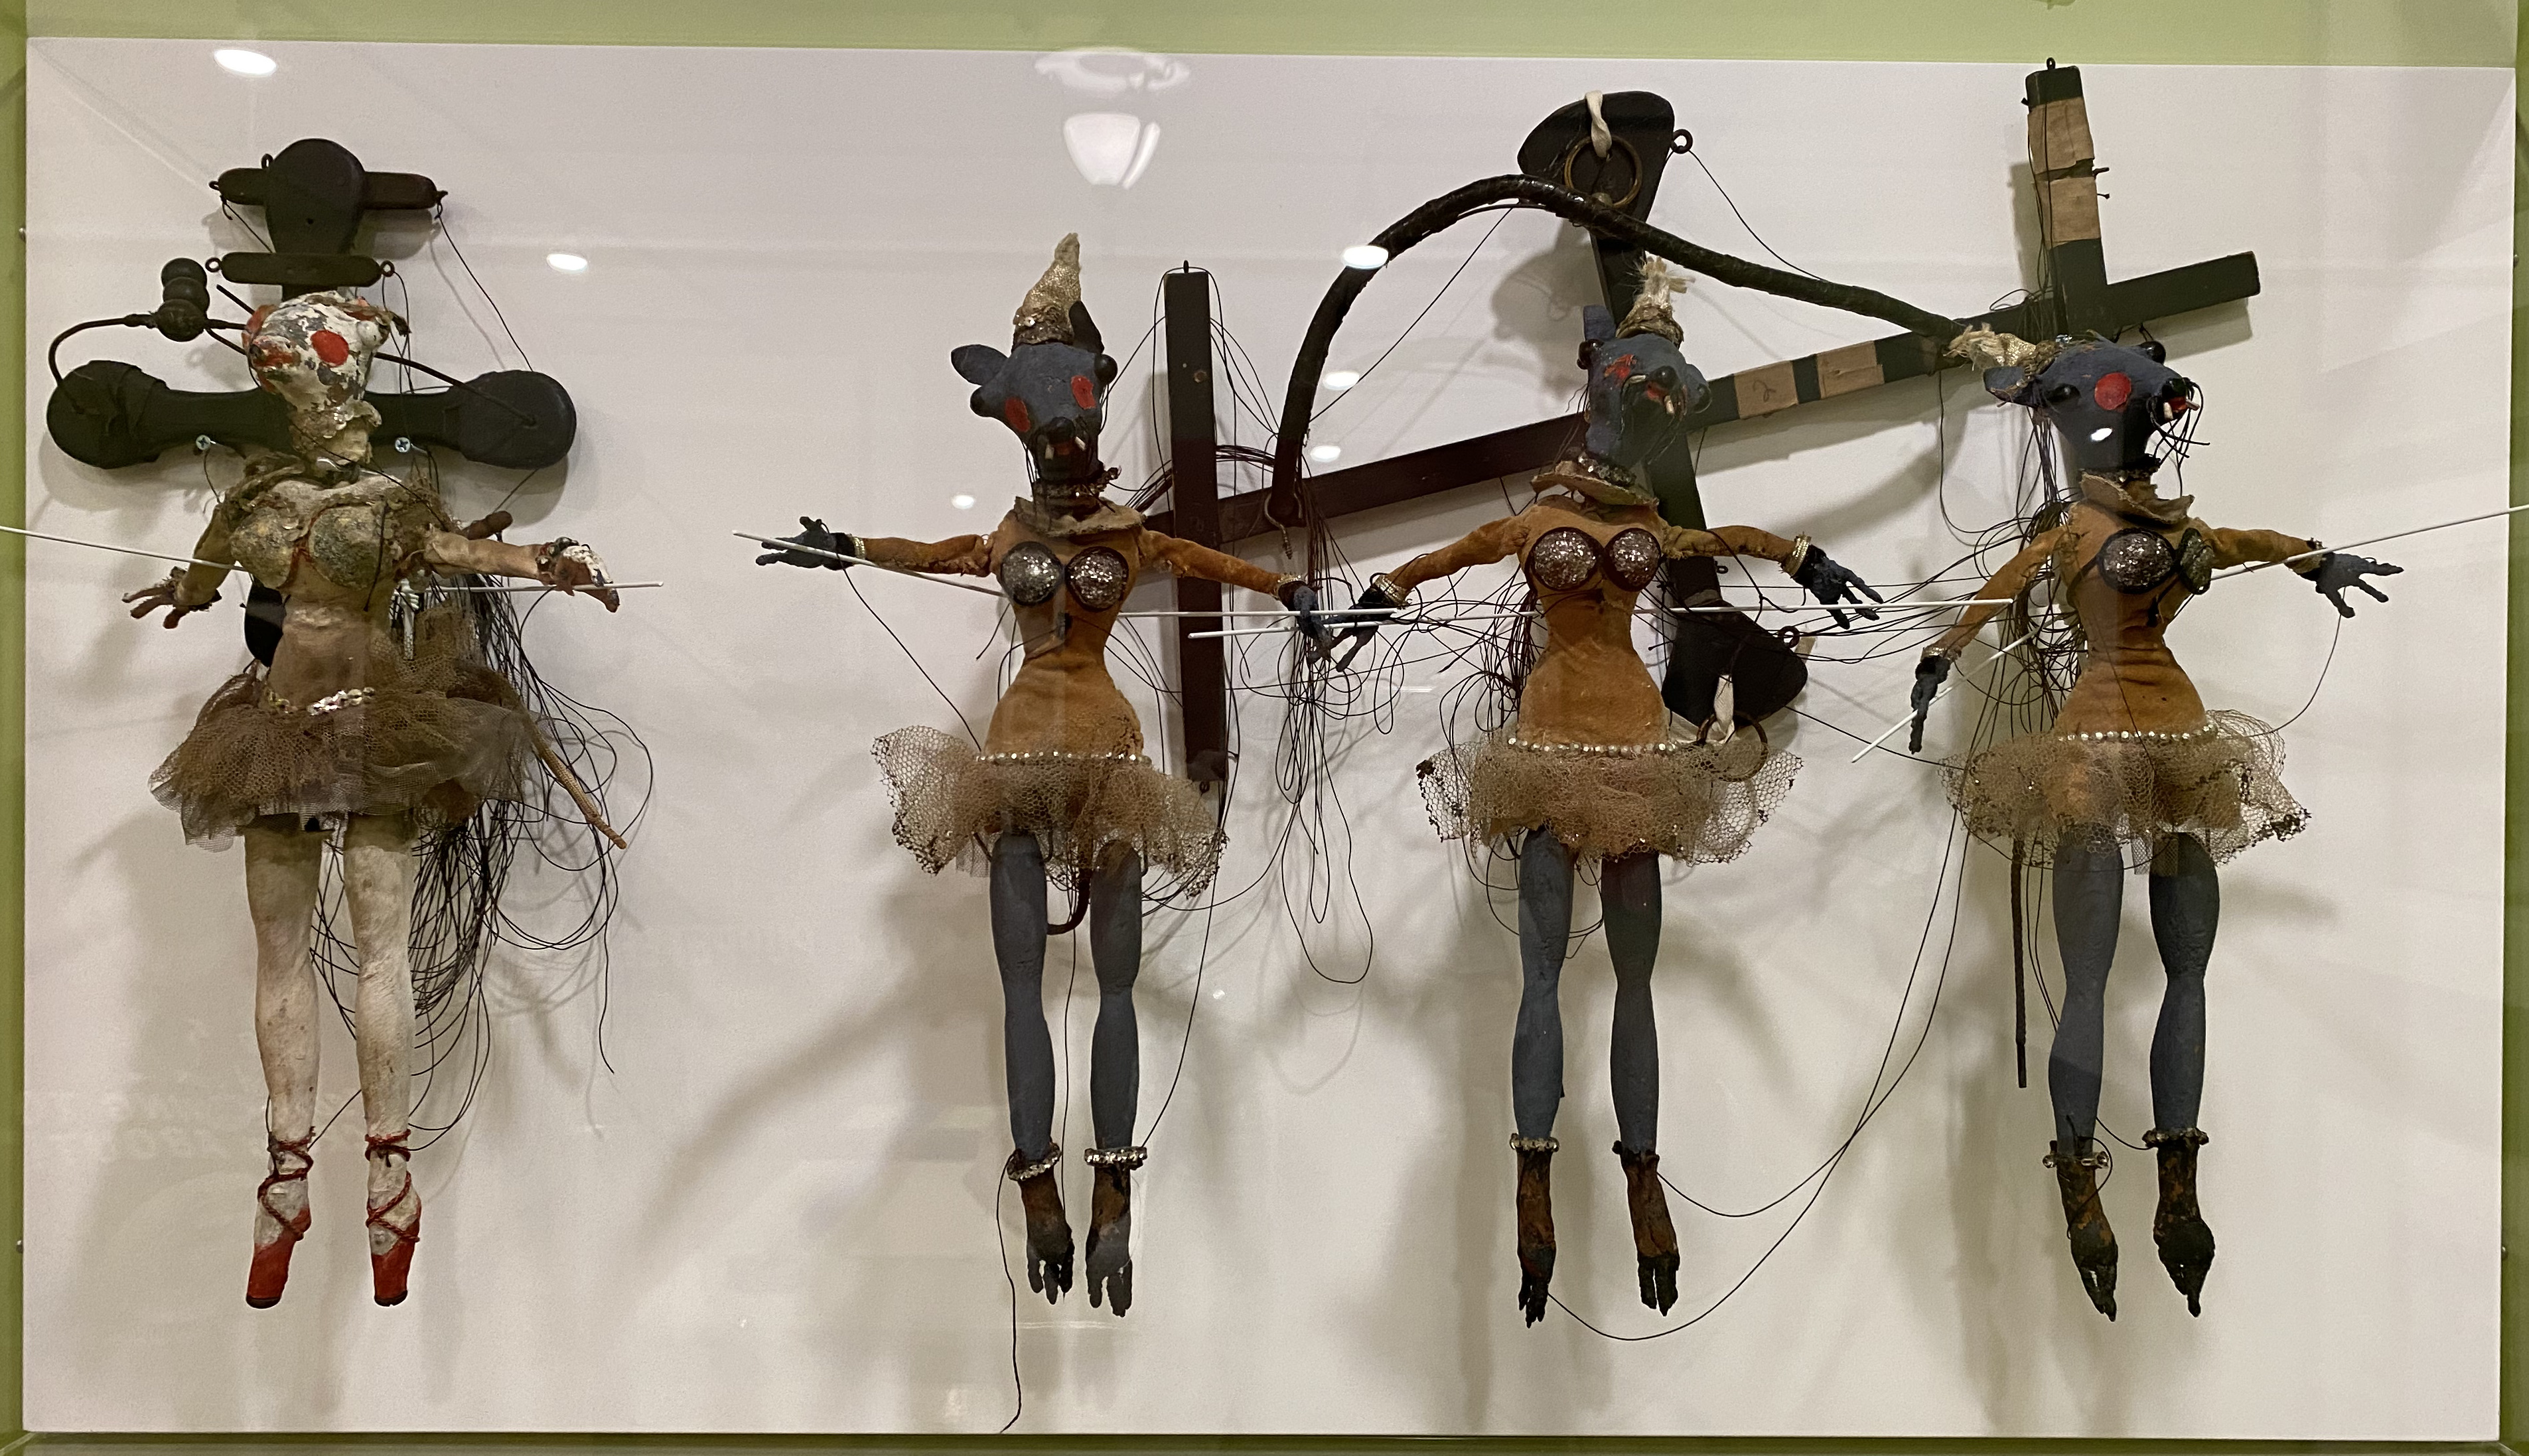 No Strings Attached: Conserving the LAPL Marionettes